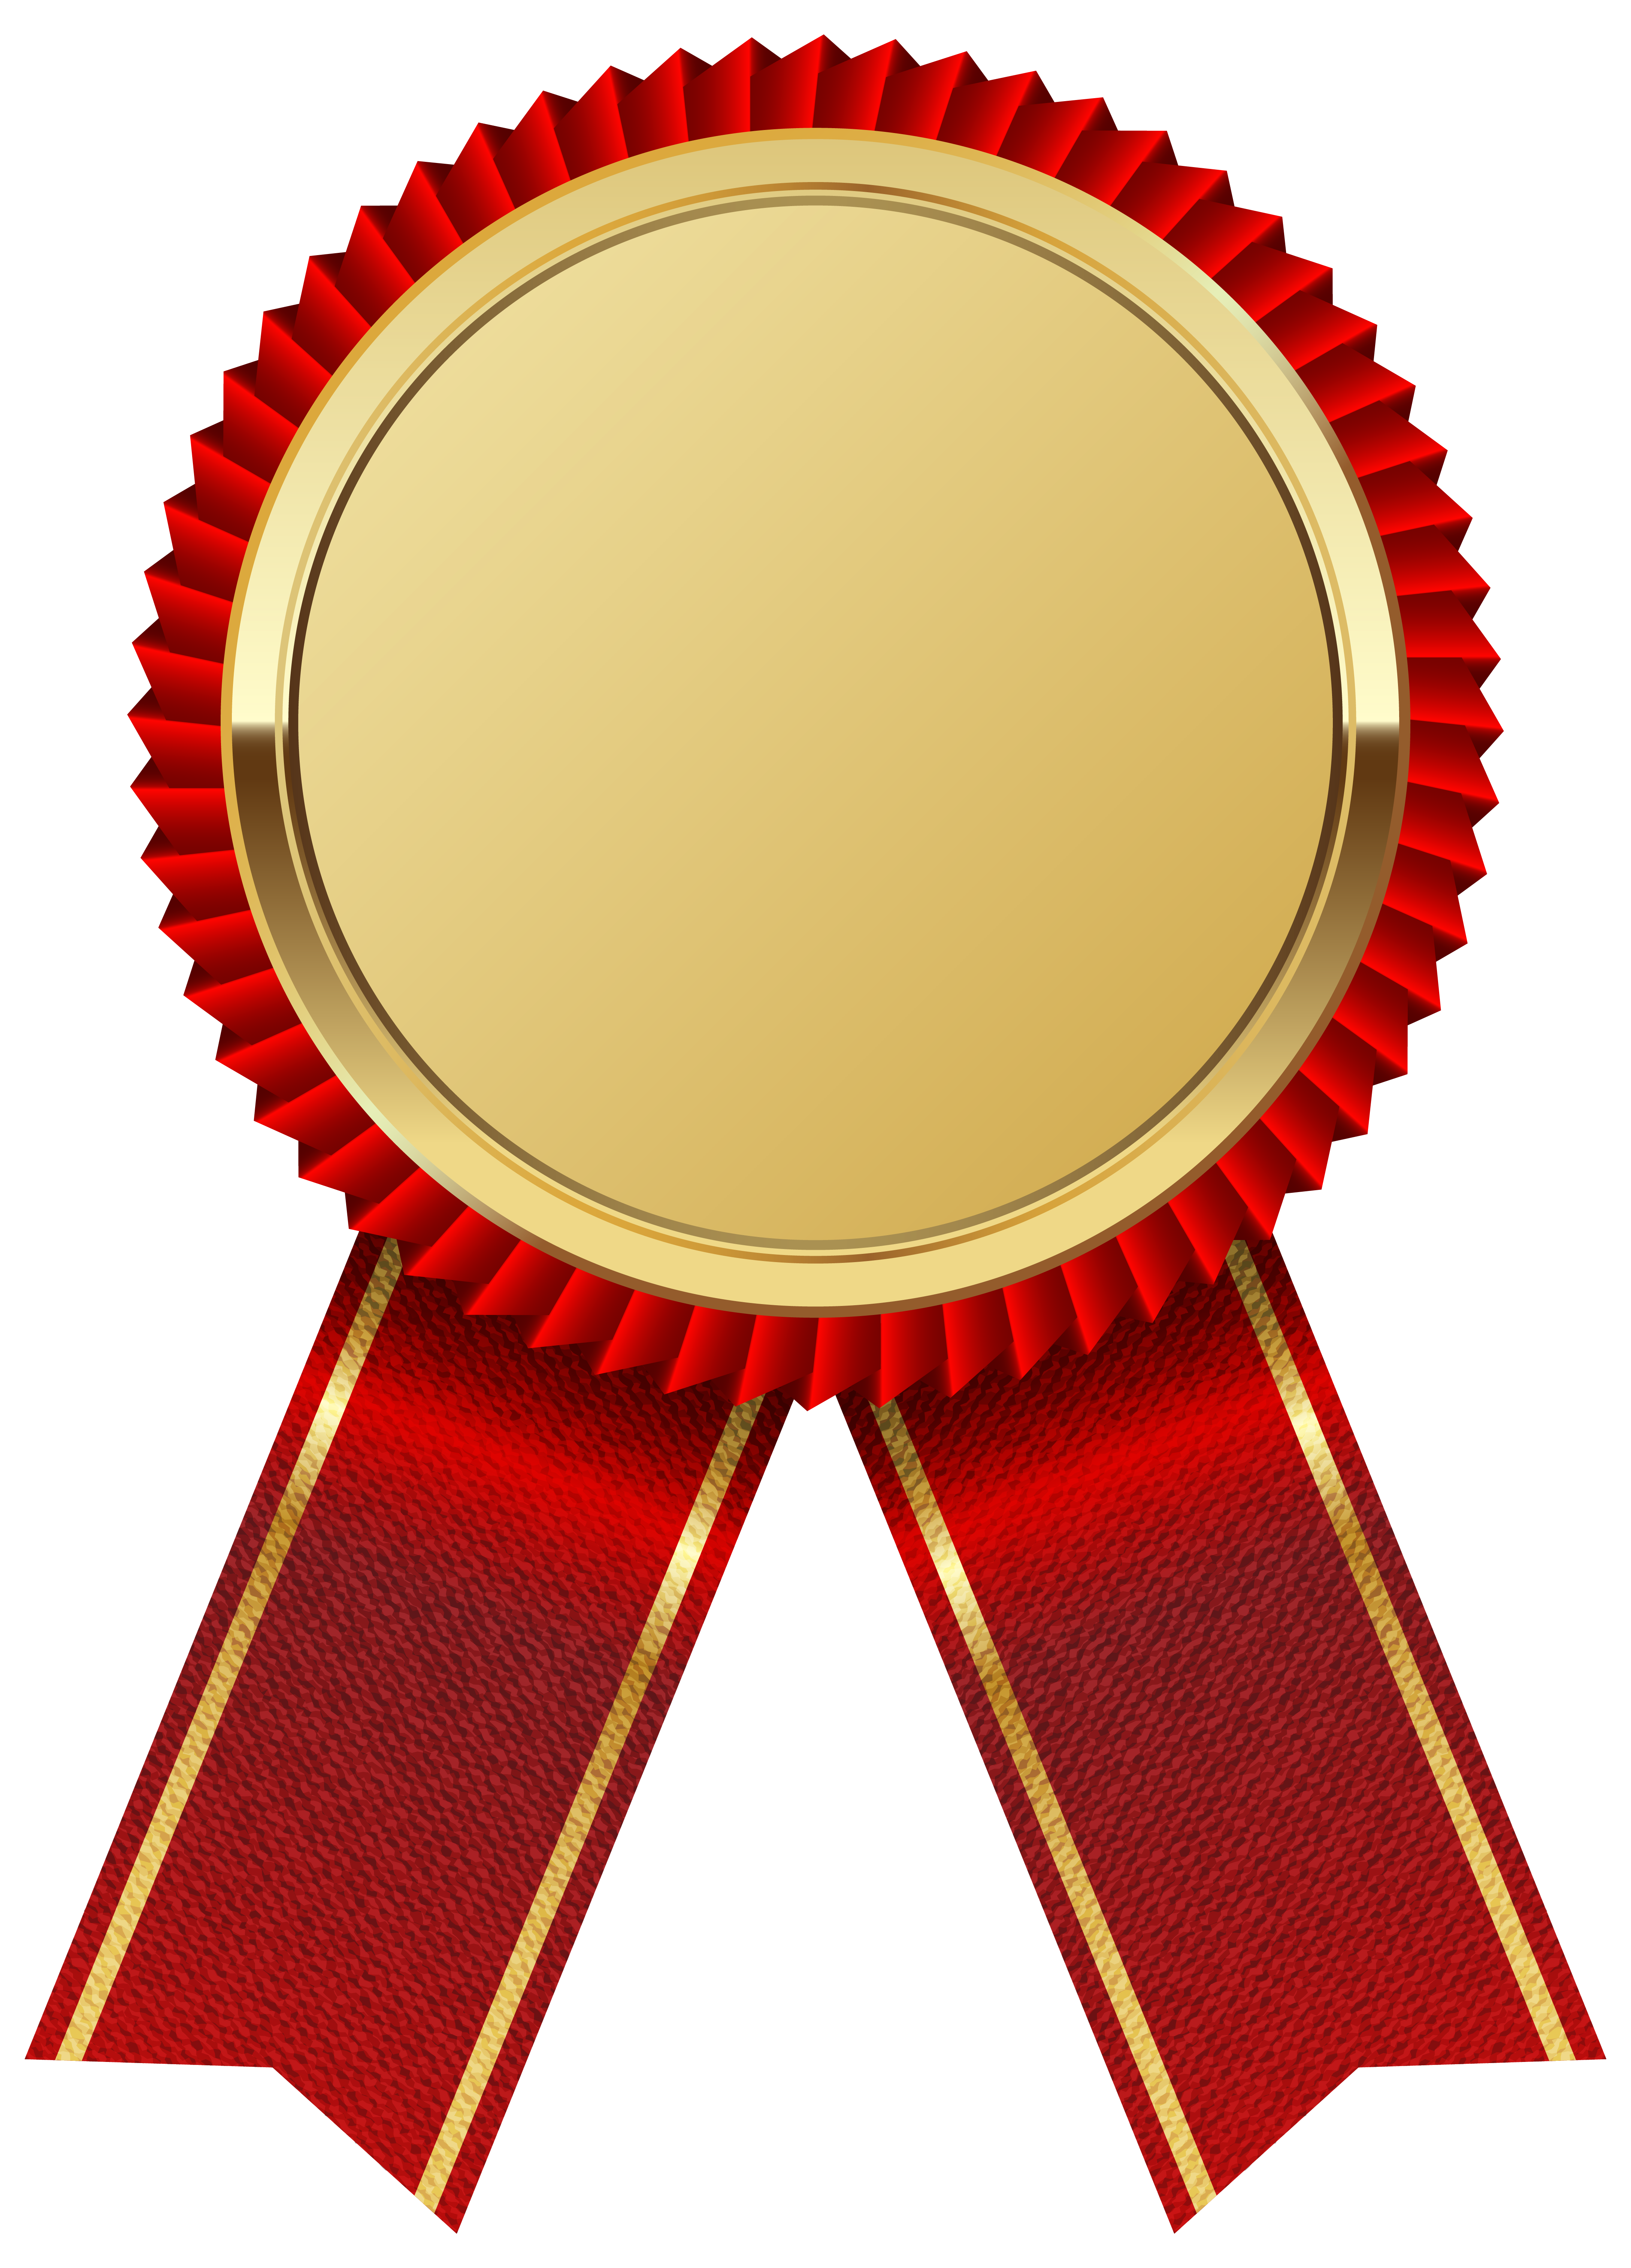 Gold Medal with Red Ribbon PNG Clipart Image  Gallery 